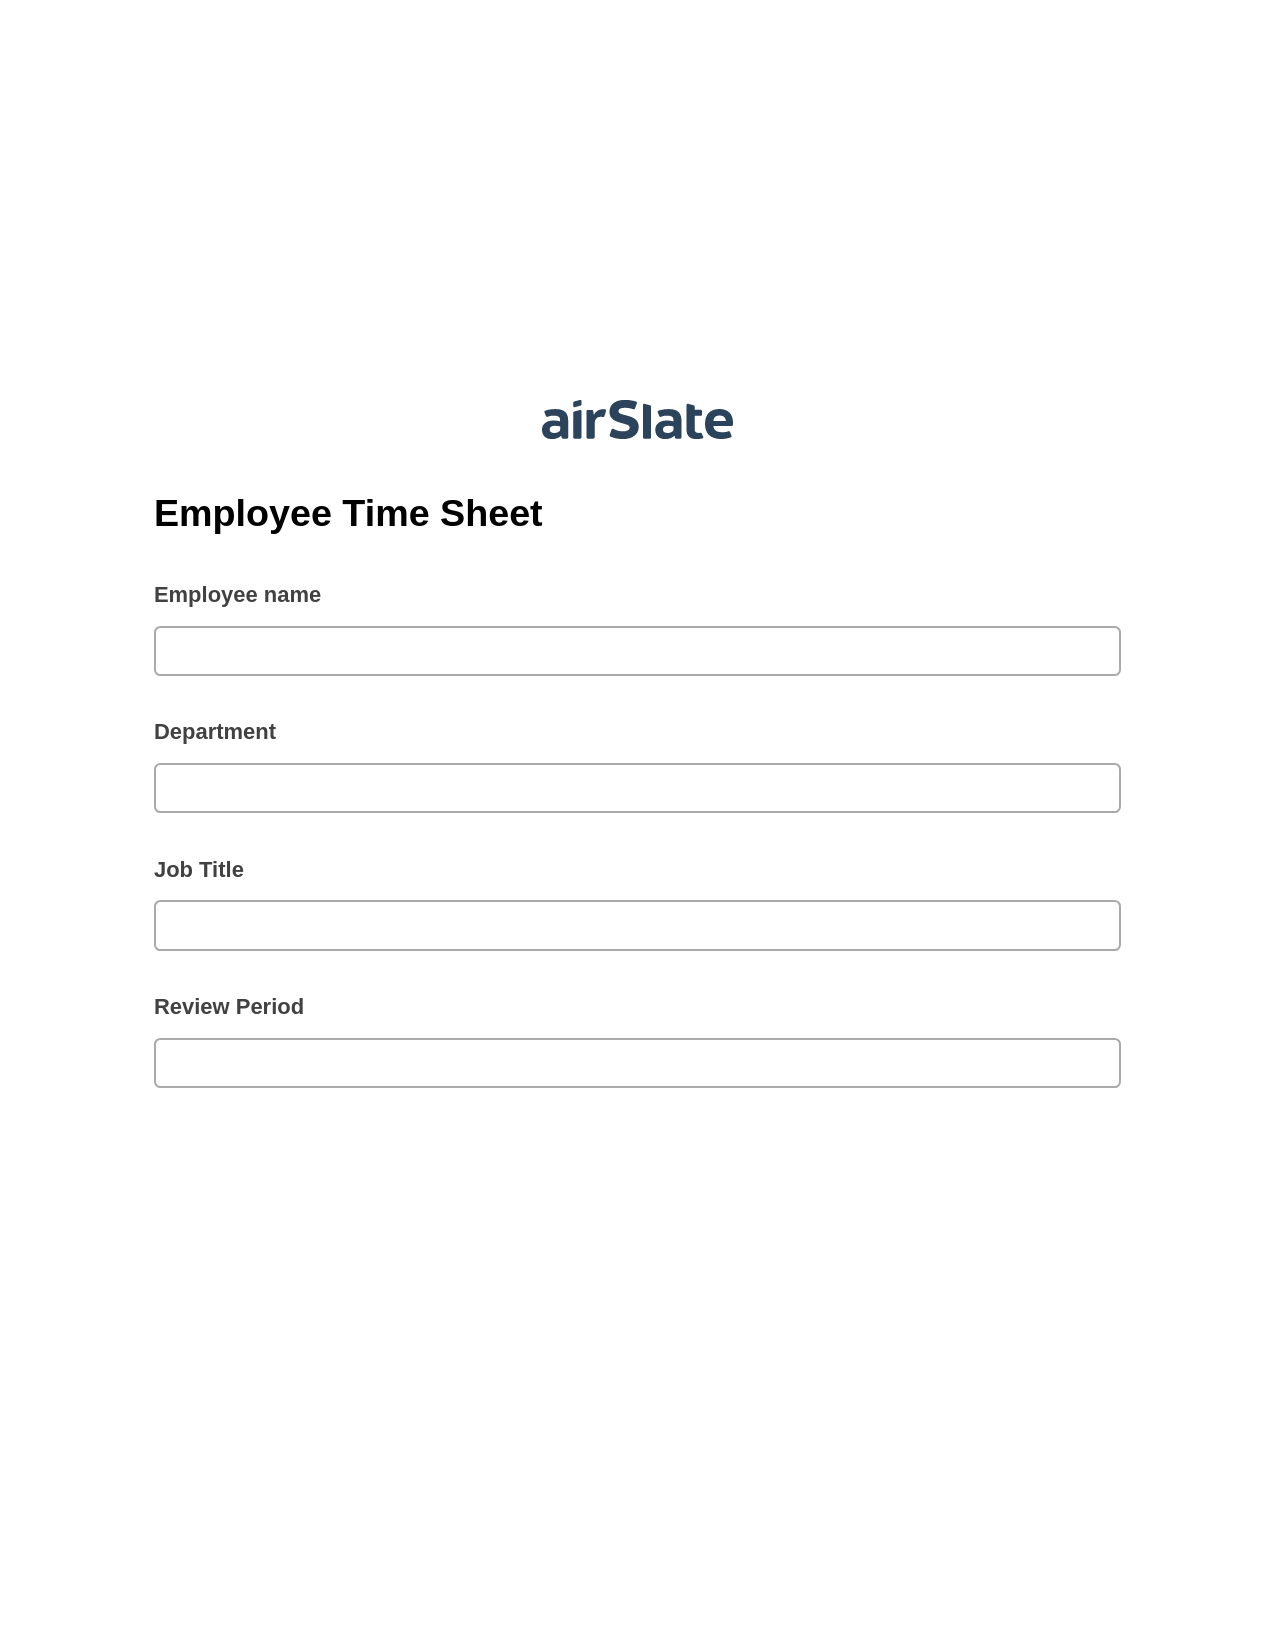 Multirole Employee Time Sheet Pre-fill from another Slate Bot, Create Salesforce Records Bot, Archive to Google Drive Bot